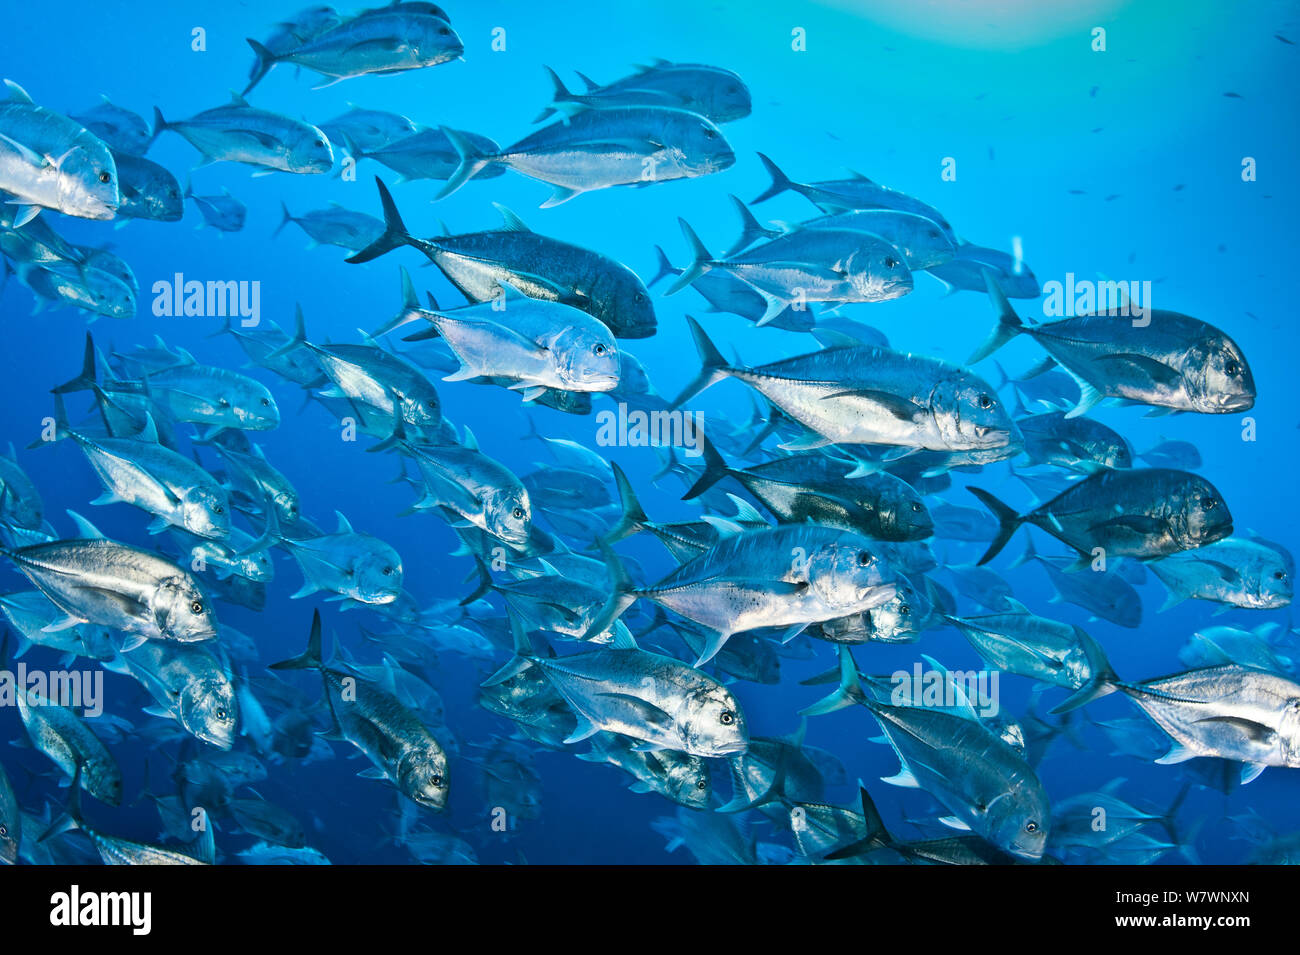 School of Giant trevallies (Caranx ignobilis) in open water off the wall at Shark Reef, Ras Mohammed Marine Park, Sinai, Egypt. Red Sea. Stock Photo